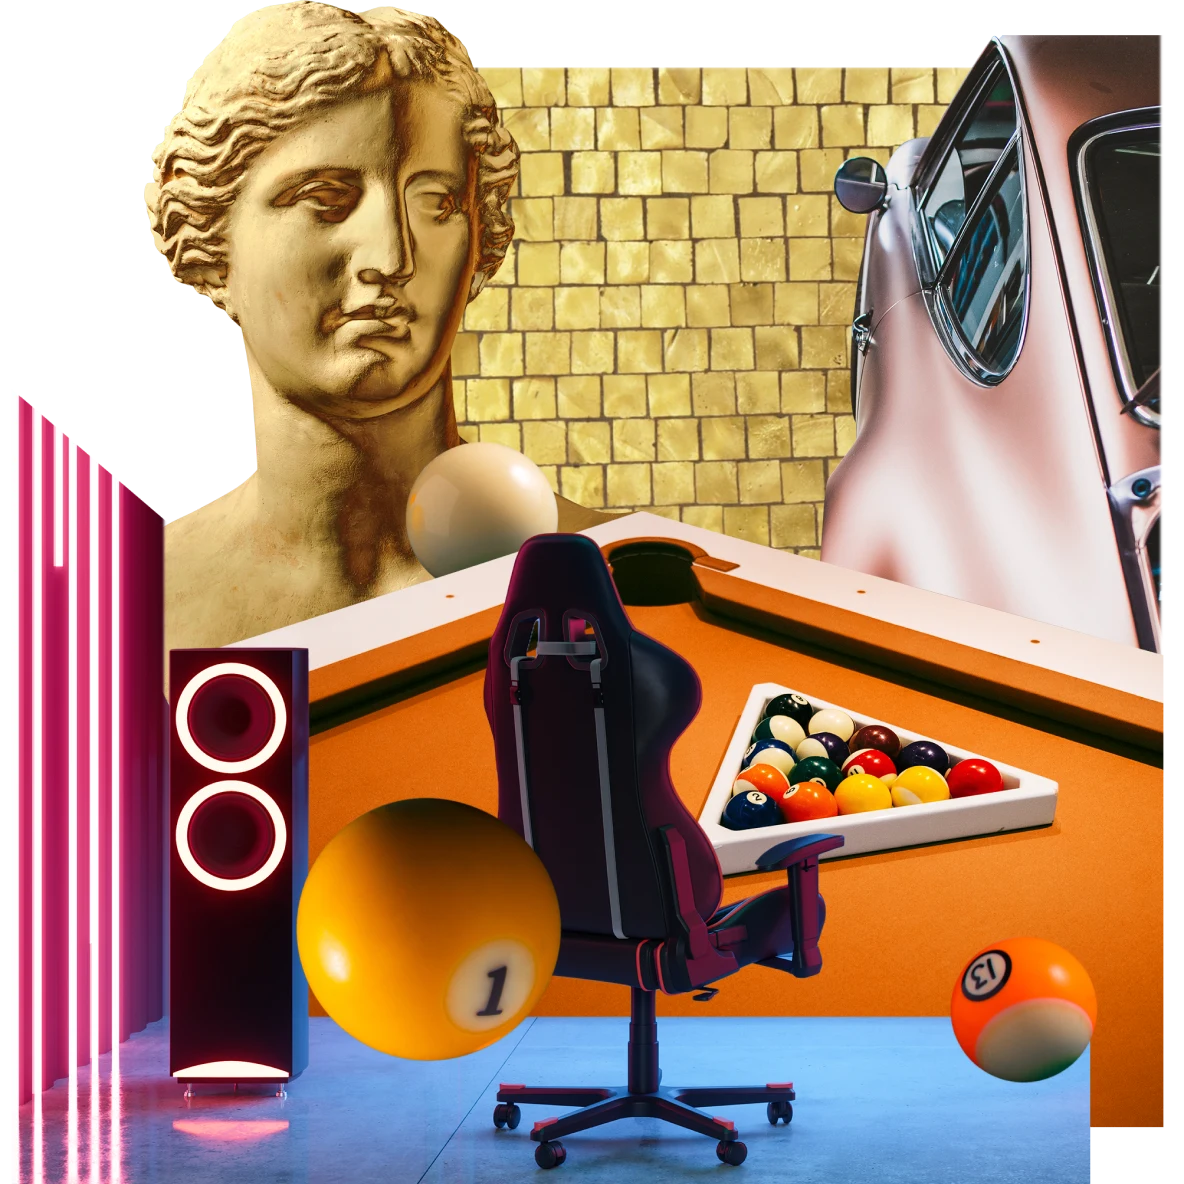 Collage of game room items. Roman bust in gold, deep red office chair, orange pool table with racked billiard balls, neon speakers and a vintage light purple car against a gold brick wall.